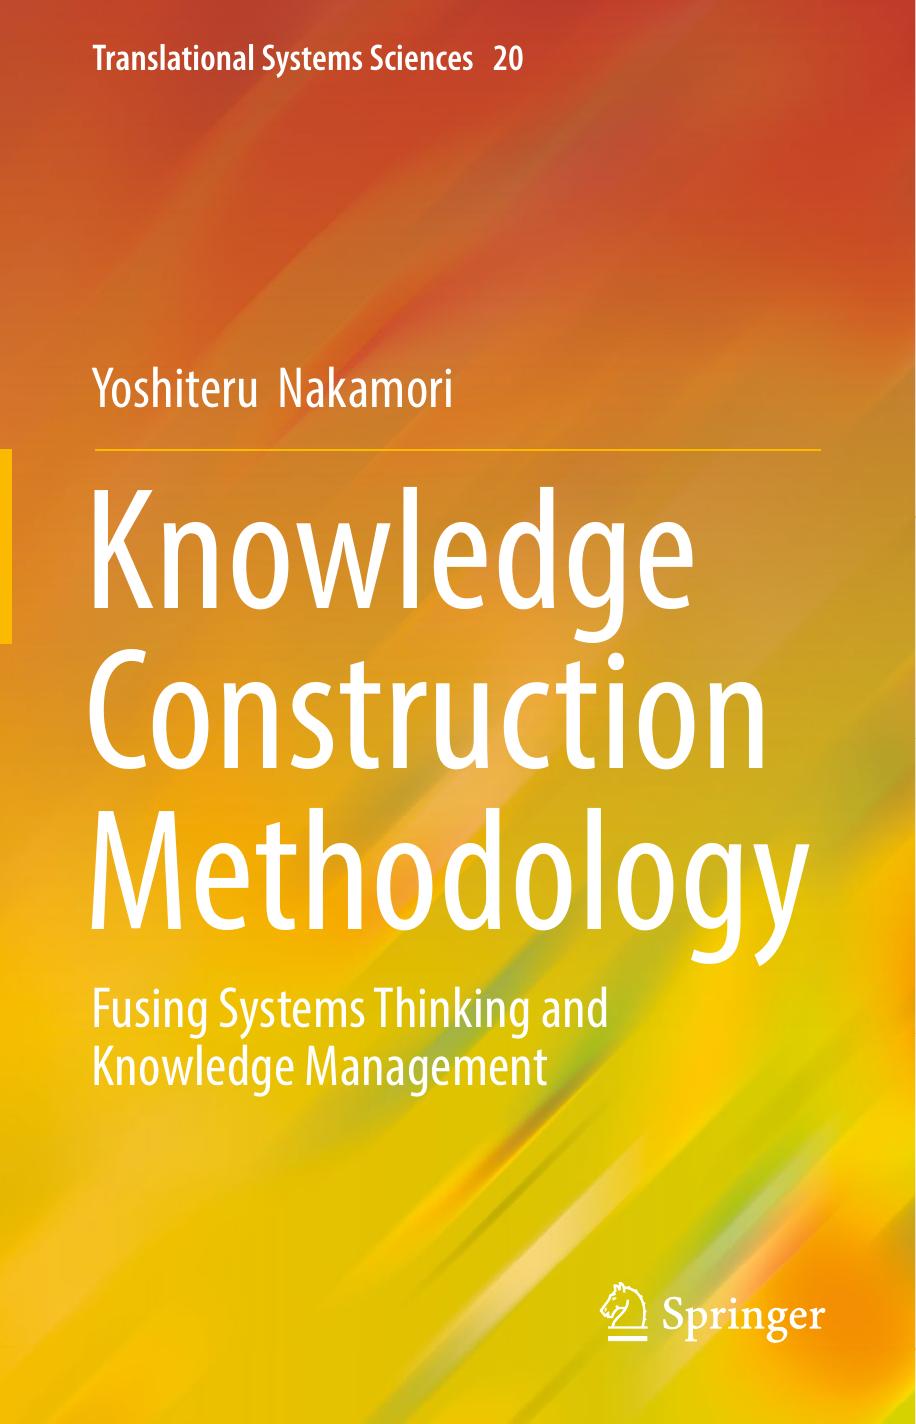 Knowledge Construction Methodology  Fusing Systems Thinking and Knowledge Management, (2020)